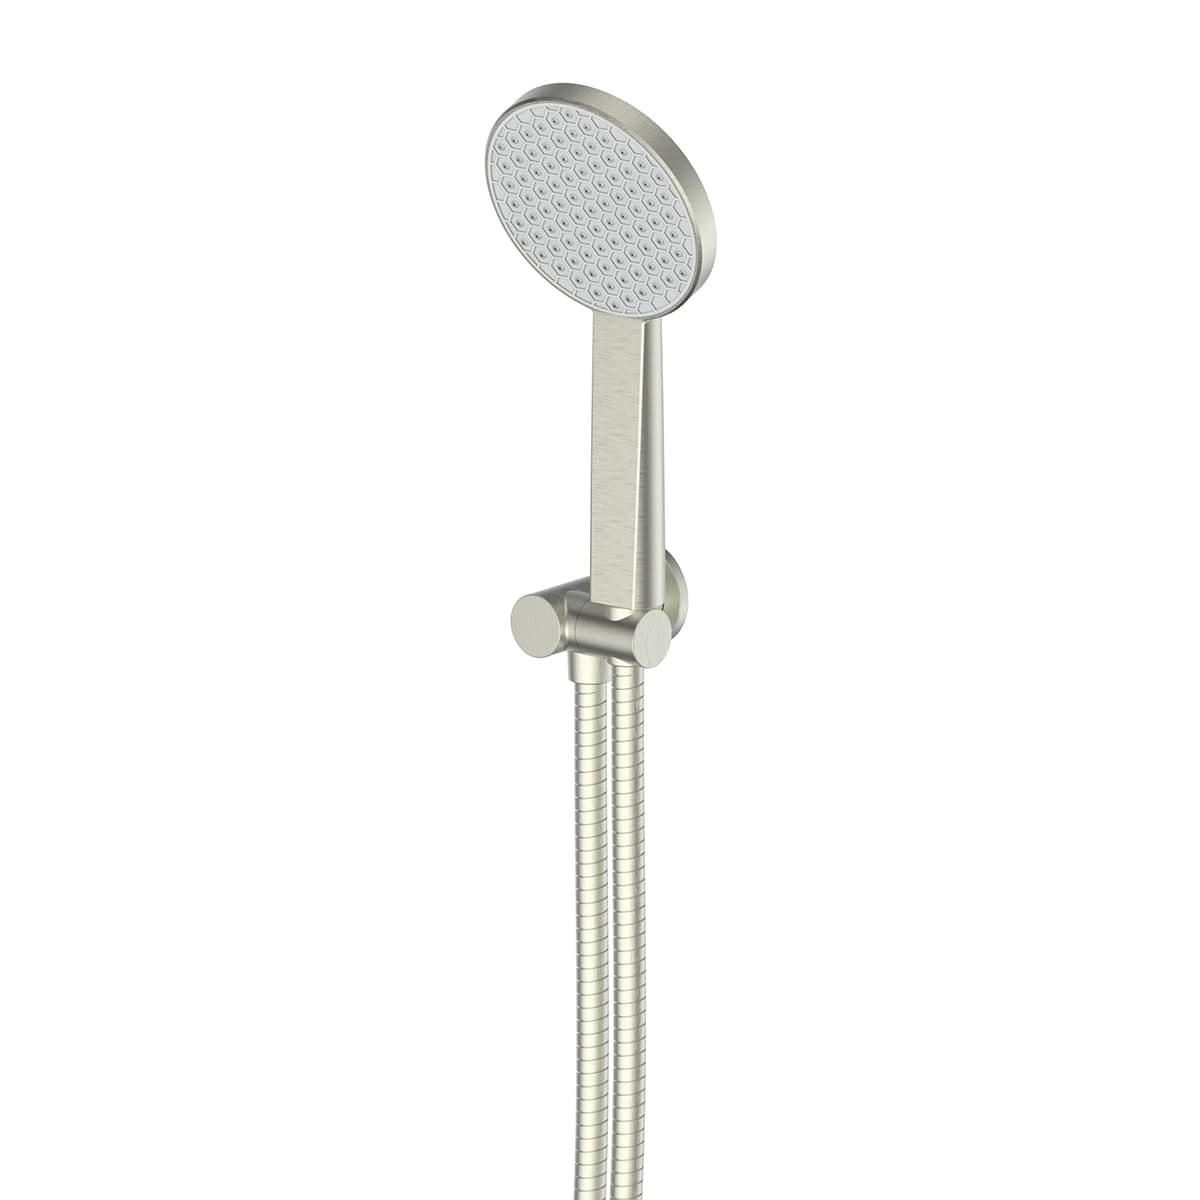 Greens shower Greens Glide RainBoost Hand Shower with Wall Outlet Bracket | Brushed Nickel